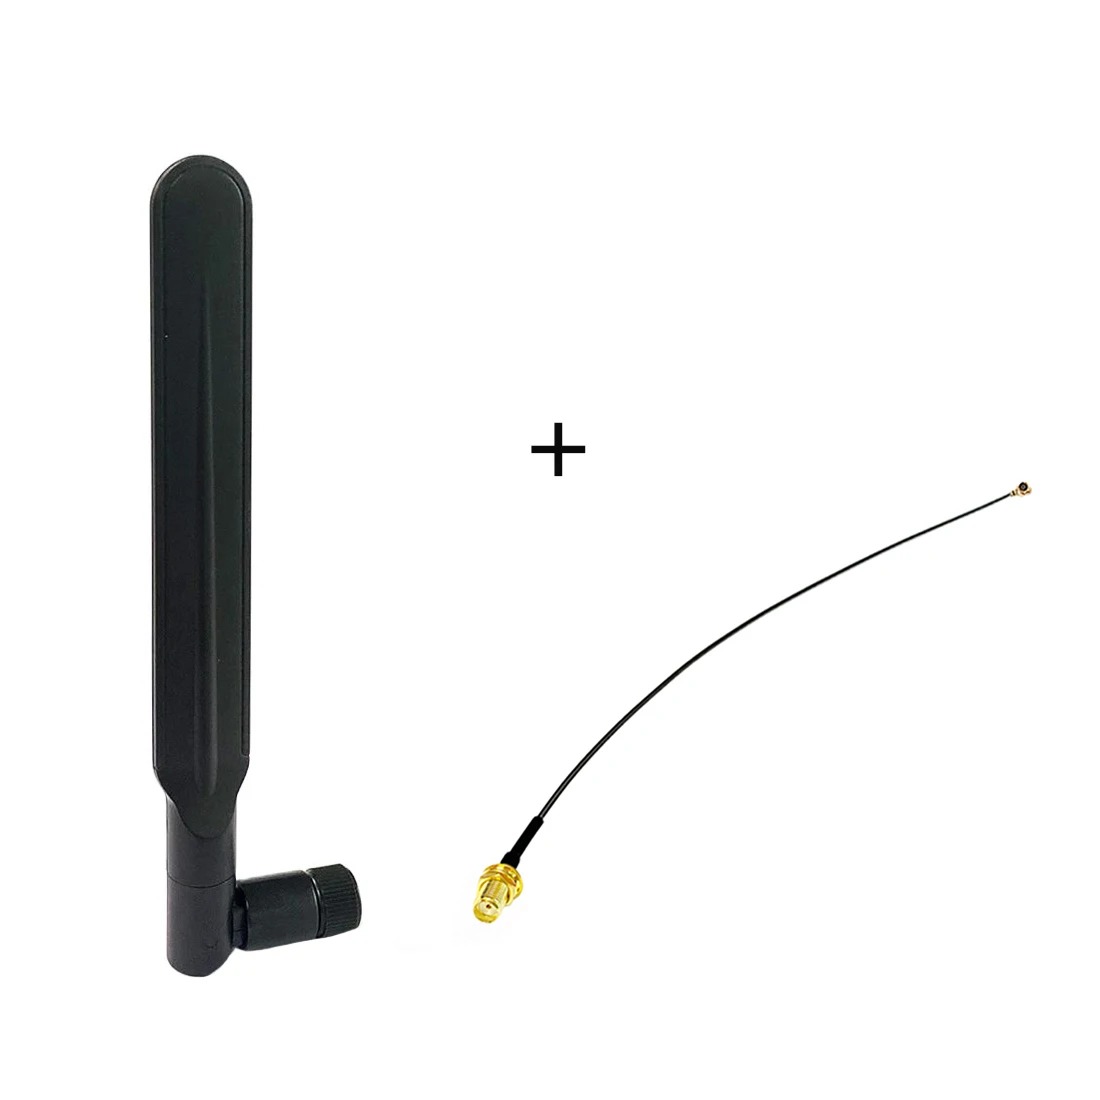 

2.4GHz / 5.8Ghz 8dBi Omni WIFI Antenna Dual Band With SMA Male Connector + RF IPX / u.fl Switch SMA Female Pigtail Cable